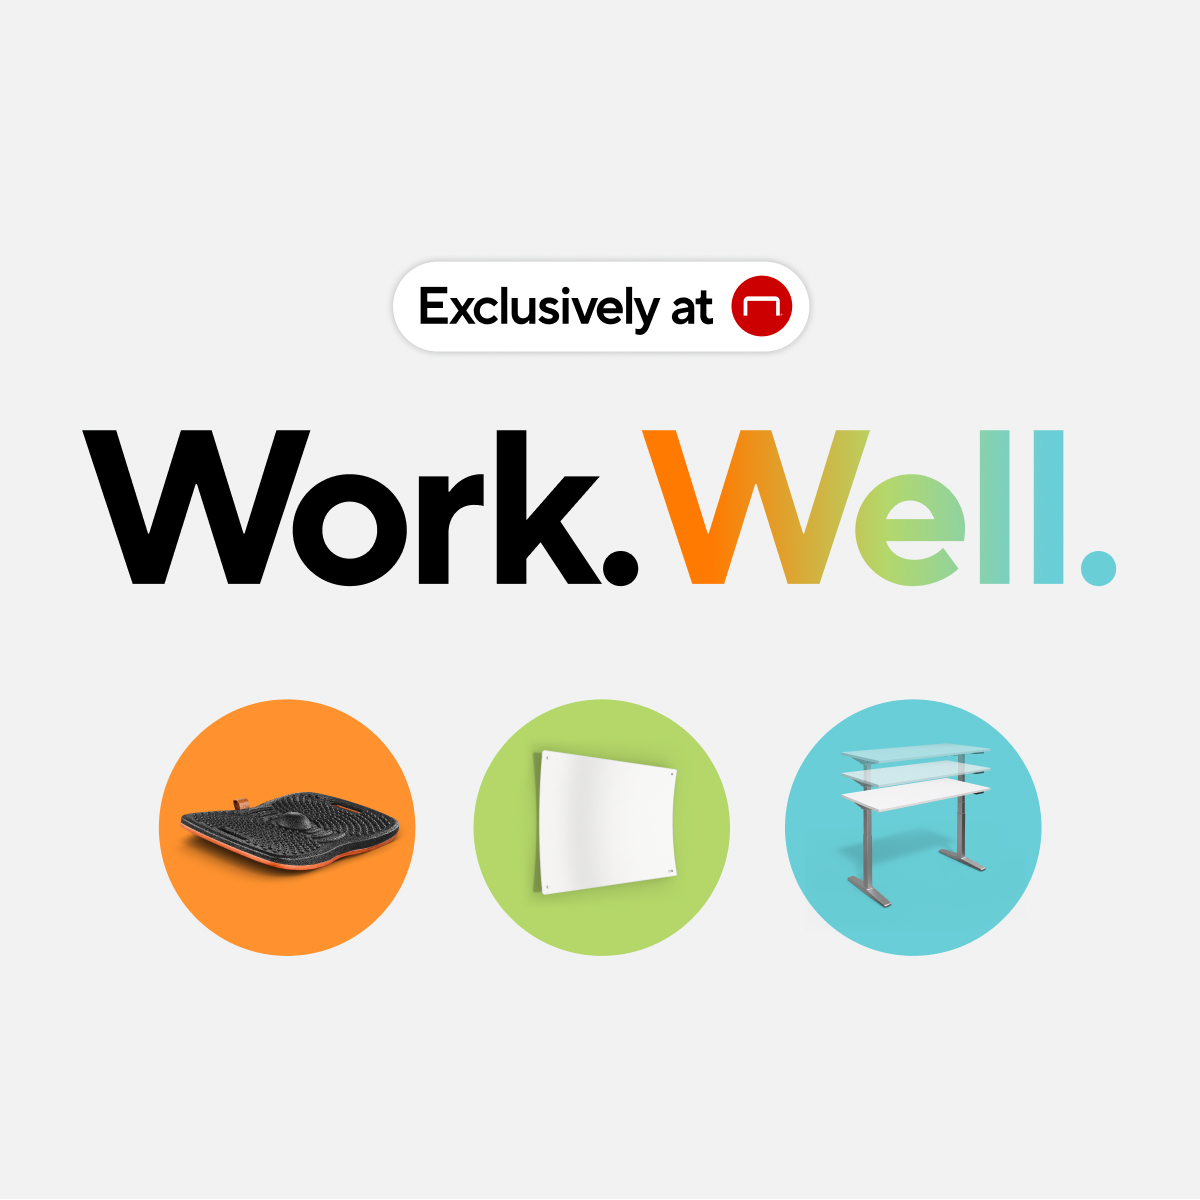 Introducing the all-new Staples Work. Well. bundle. Feel accomplished and energized with economist-approved products made to move you. bit.ly/3UHdqSK